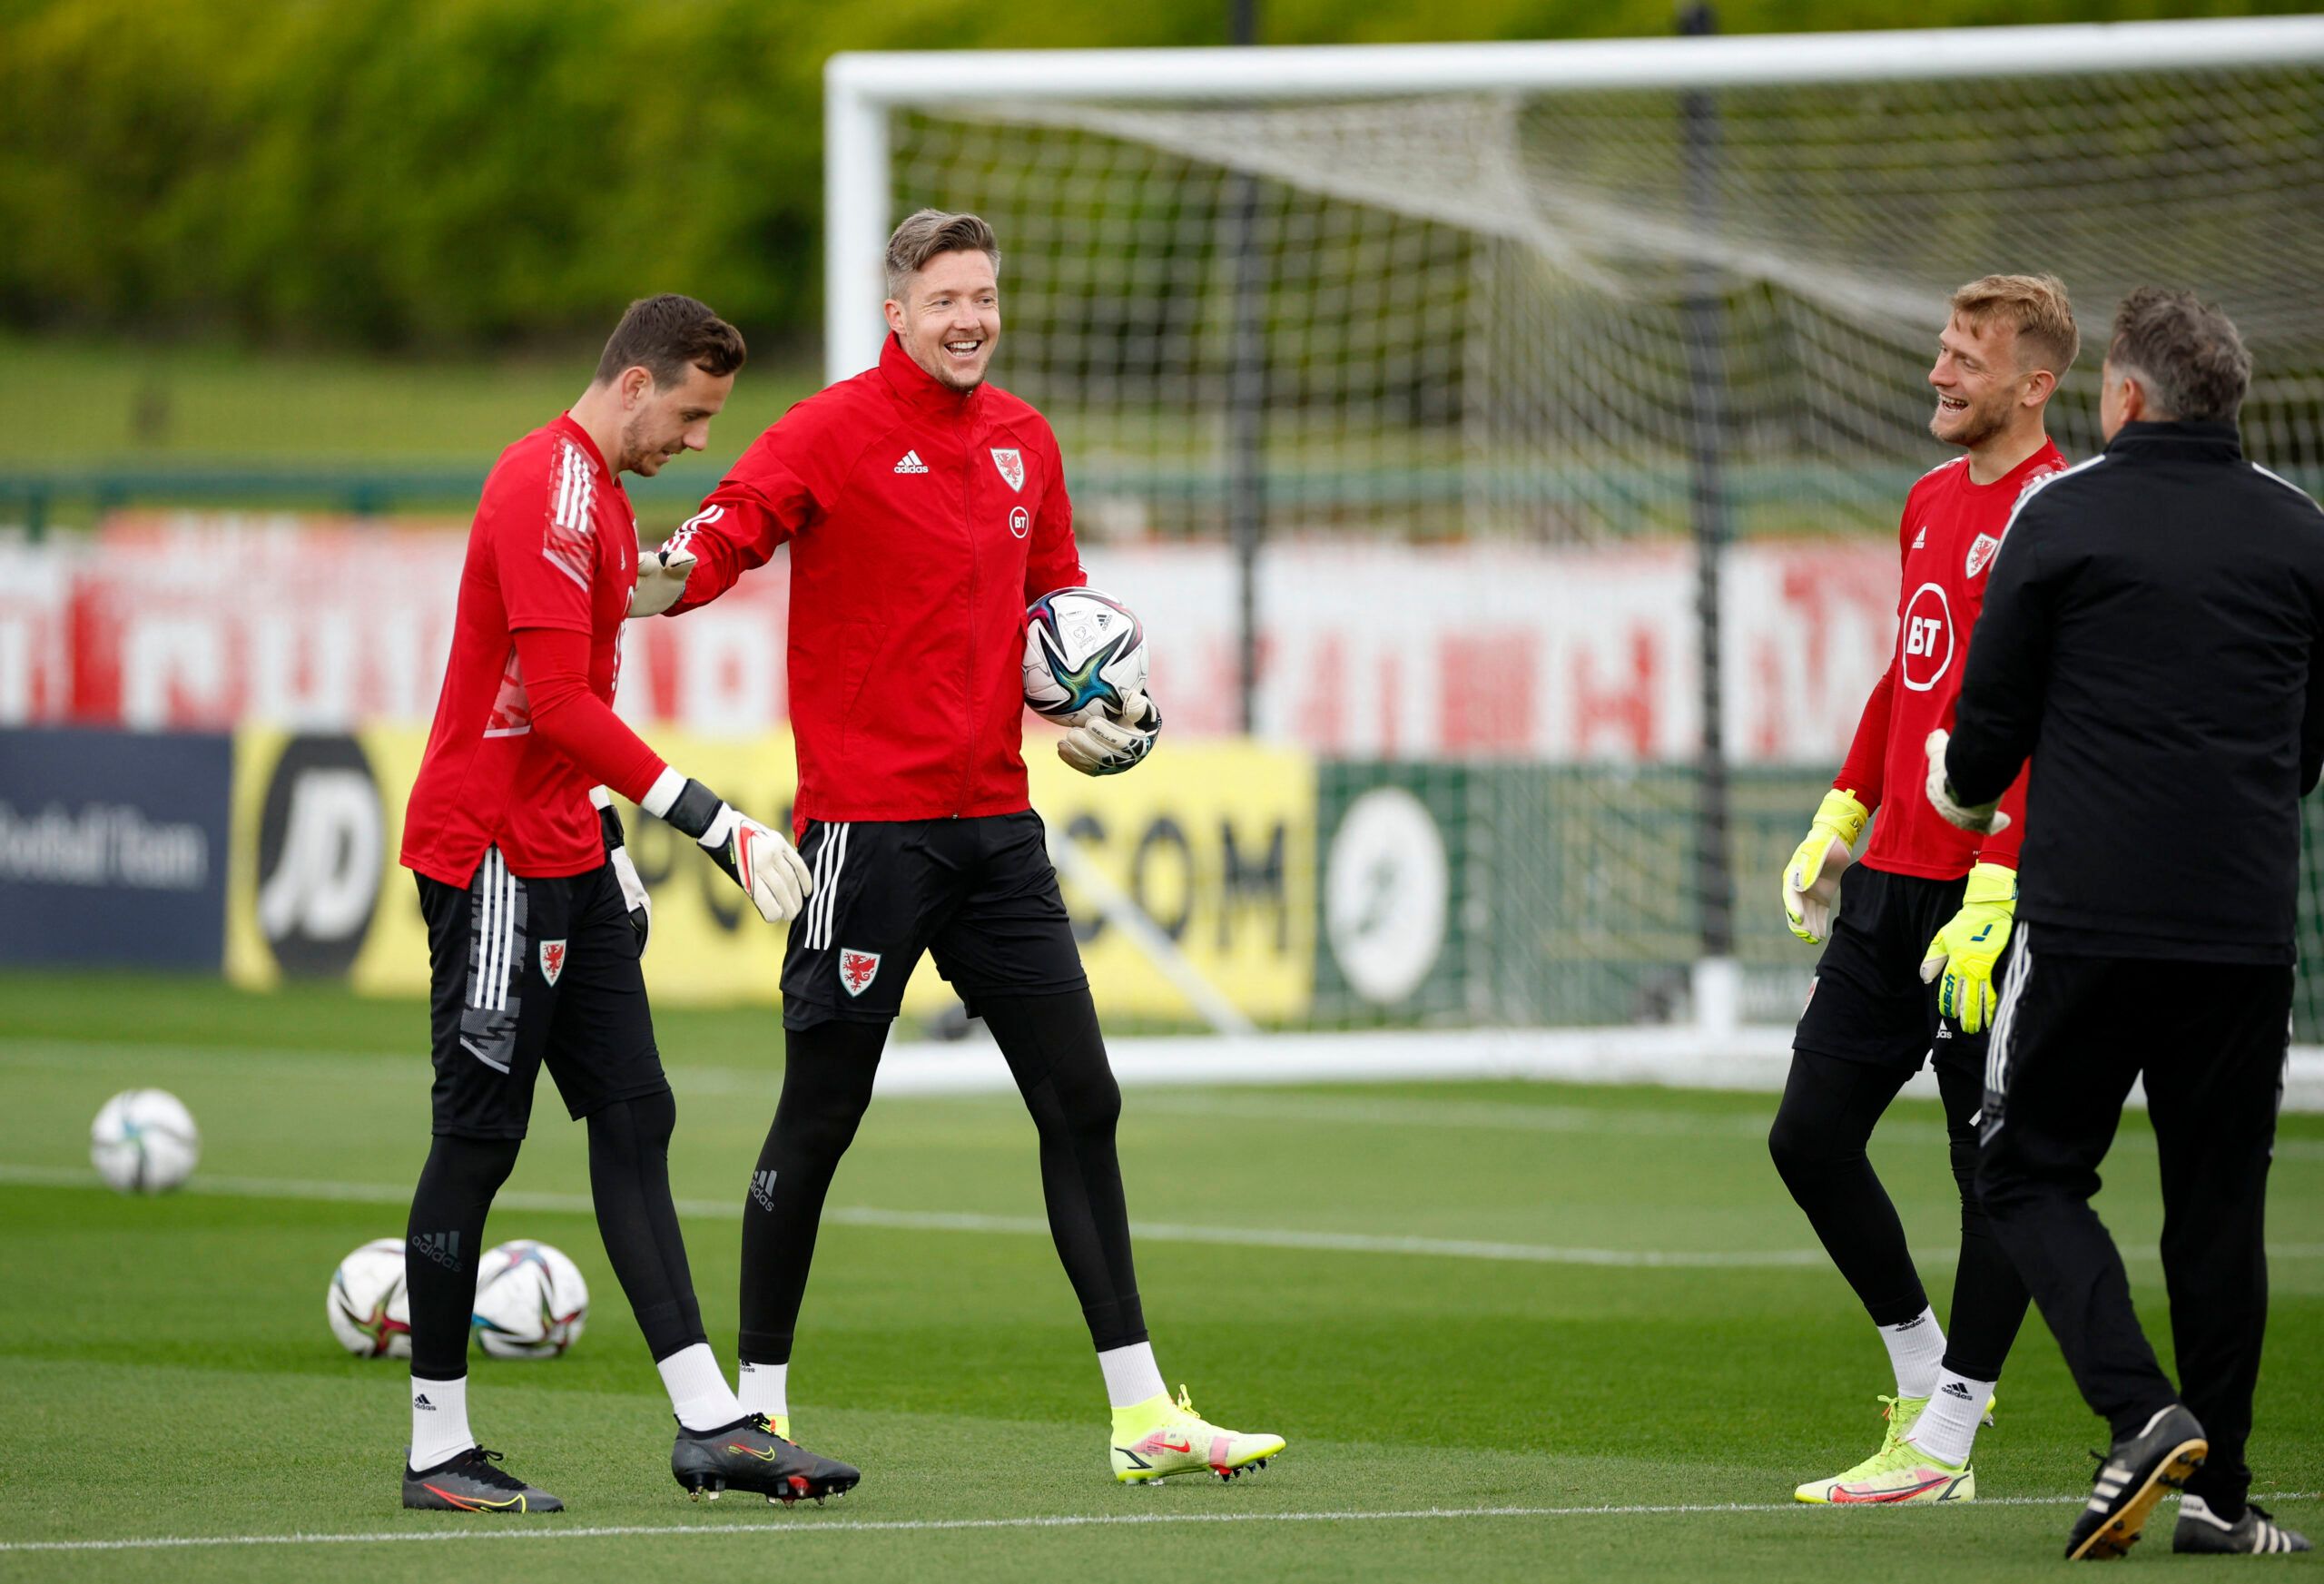 Soccer Football - World Cup - UEFA Qualifiers - Wales Training - Vale Resort, Hensol, Wales, Britain - June 4, 2022  Wales' Wayne Hennessey, Danny Ward and Adam Davies during training Action Images via Reuters/John Sibley